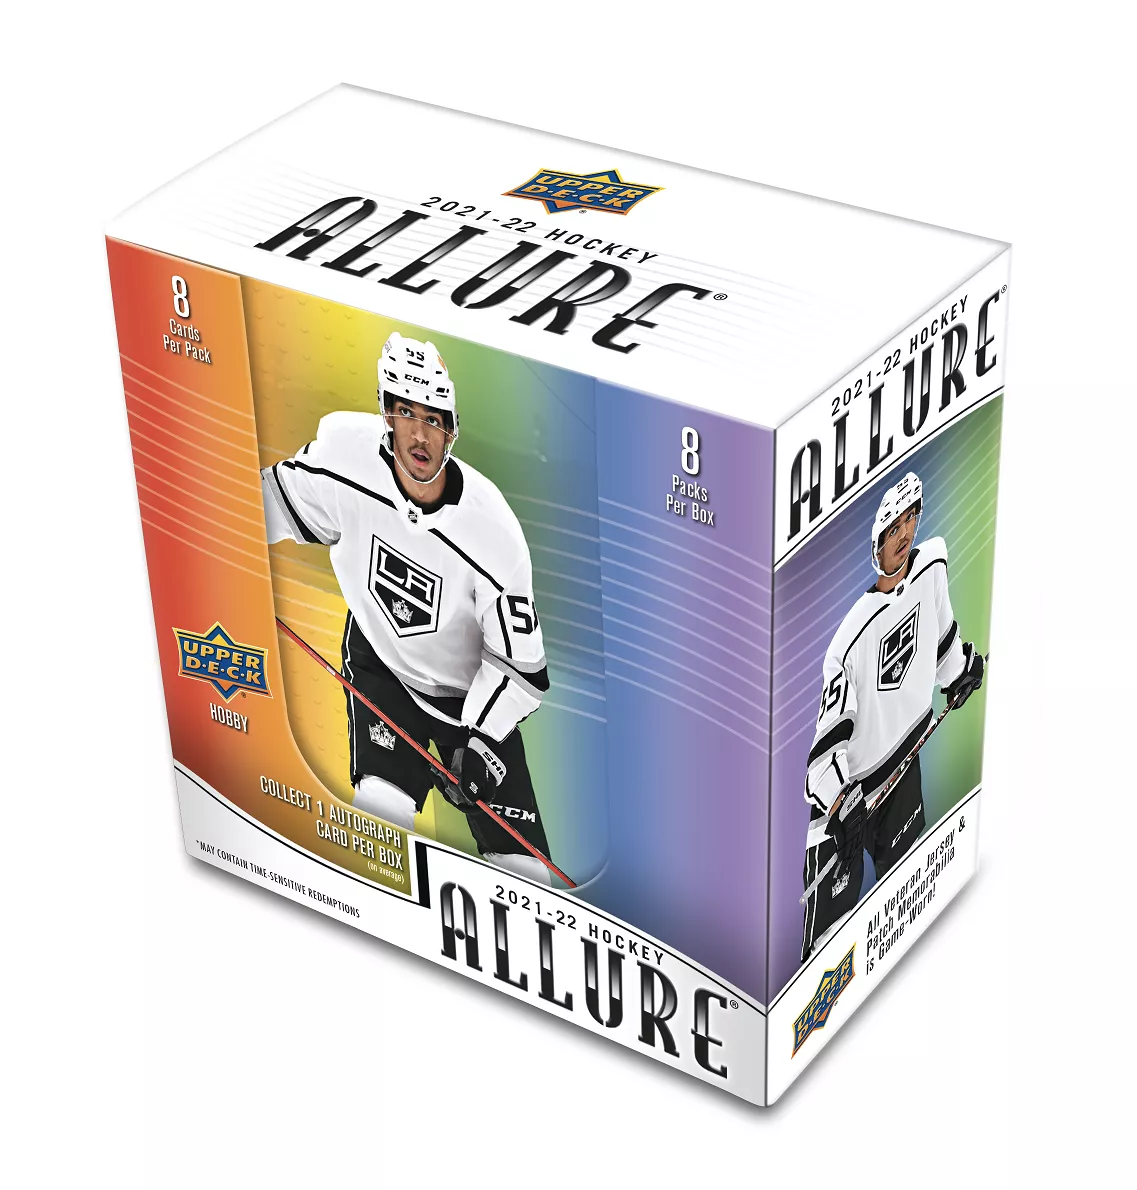 UD Allure 2021/2022 Hobby Box